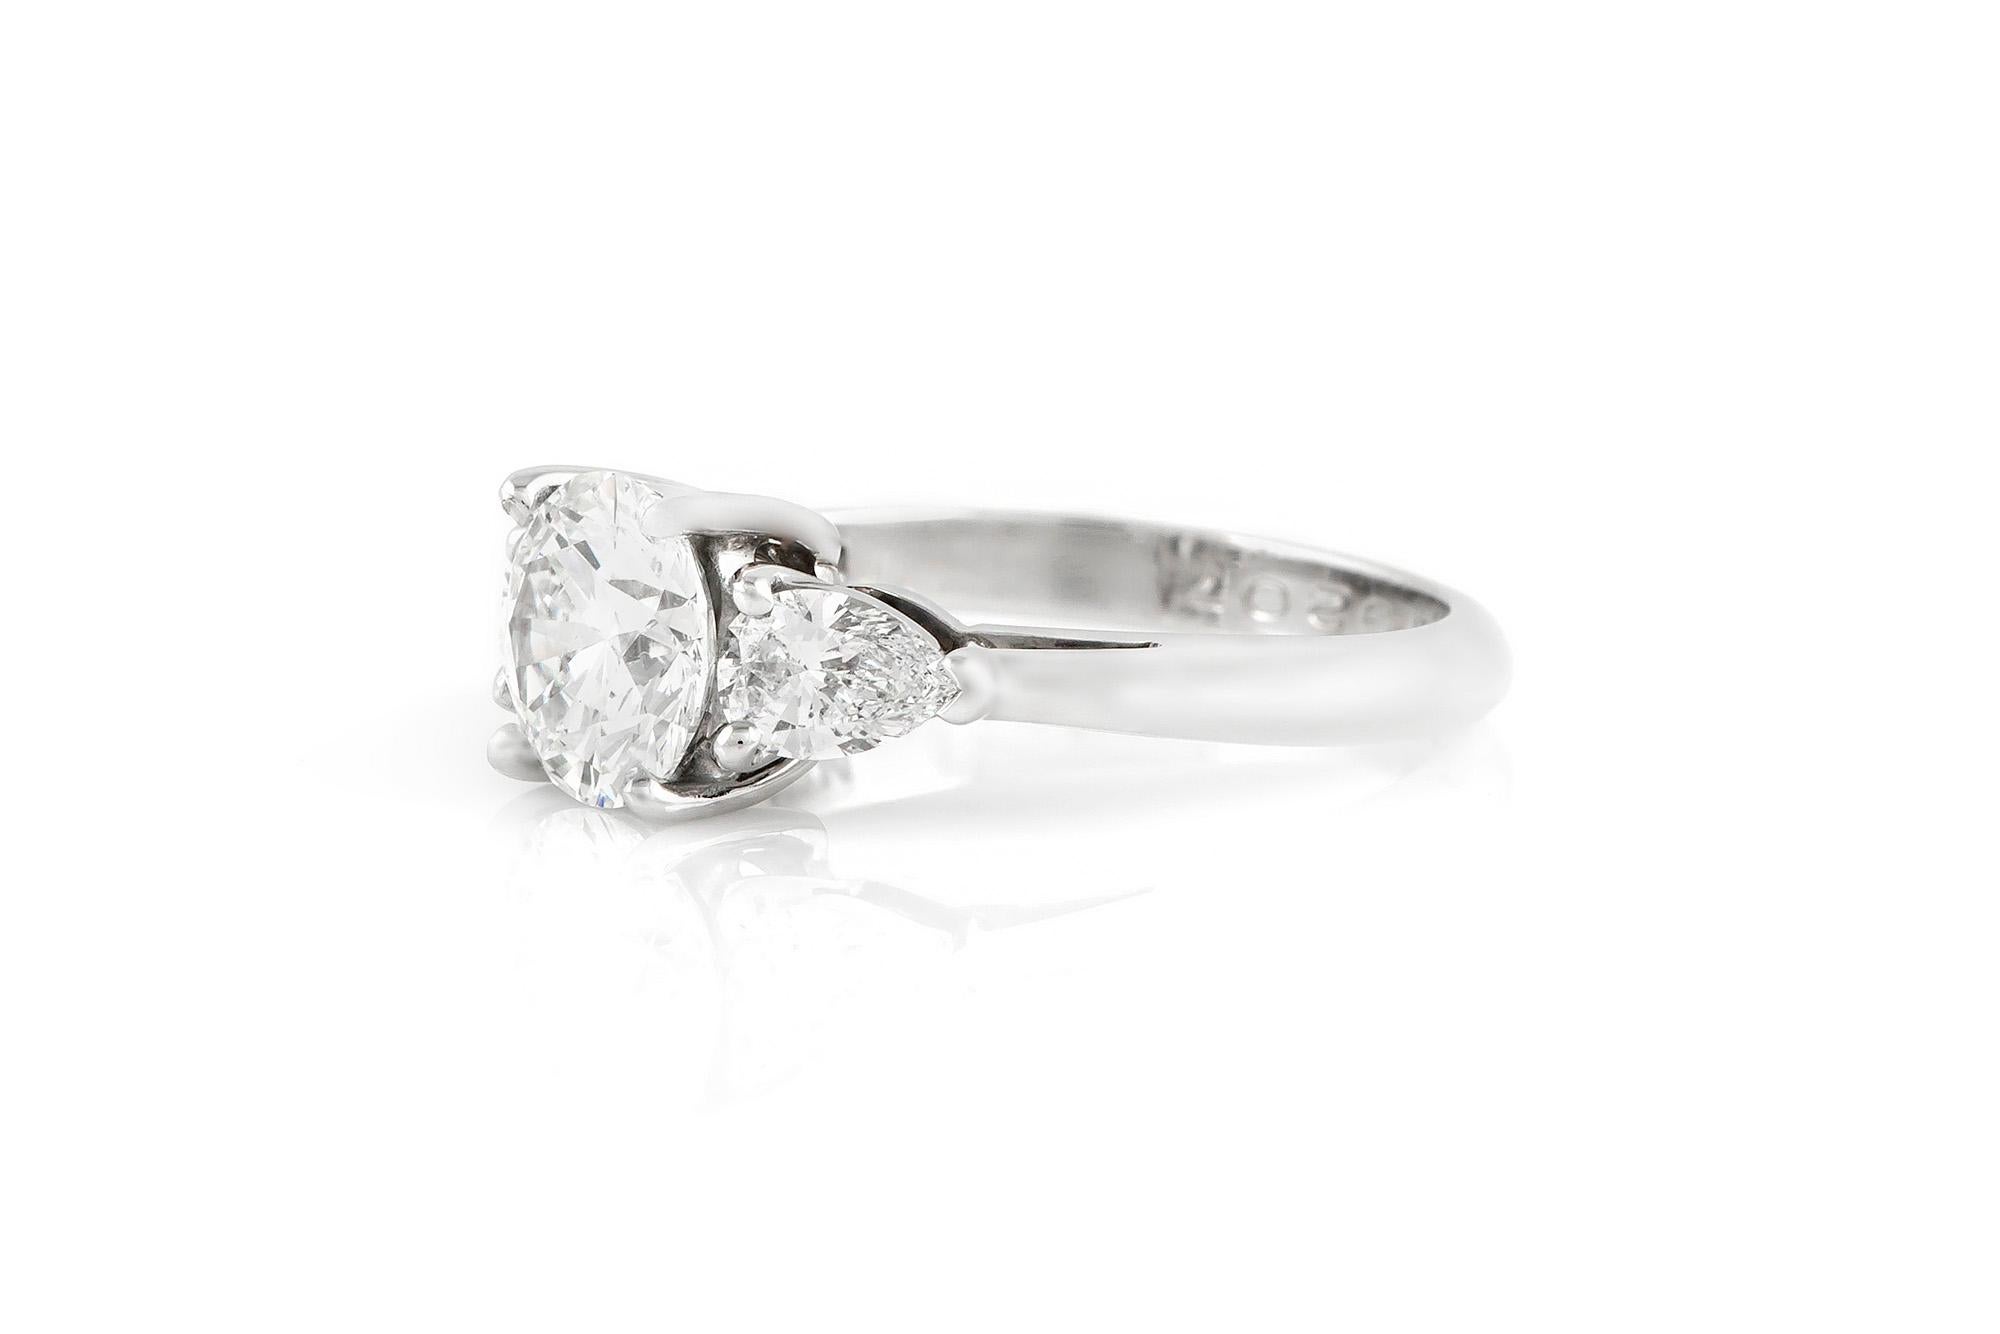 Signed Tiffany & Co. engagement ring finely crafted in platinum. Round brilliant cut diamond E color VS1 clarity, weighing a total of 1.50 carat. 